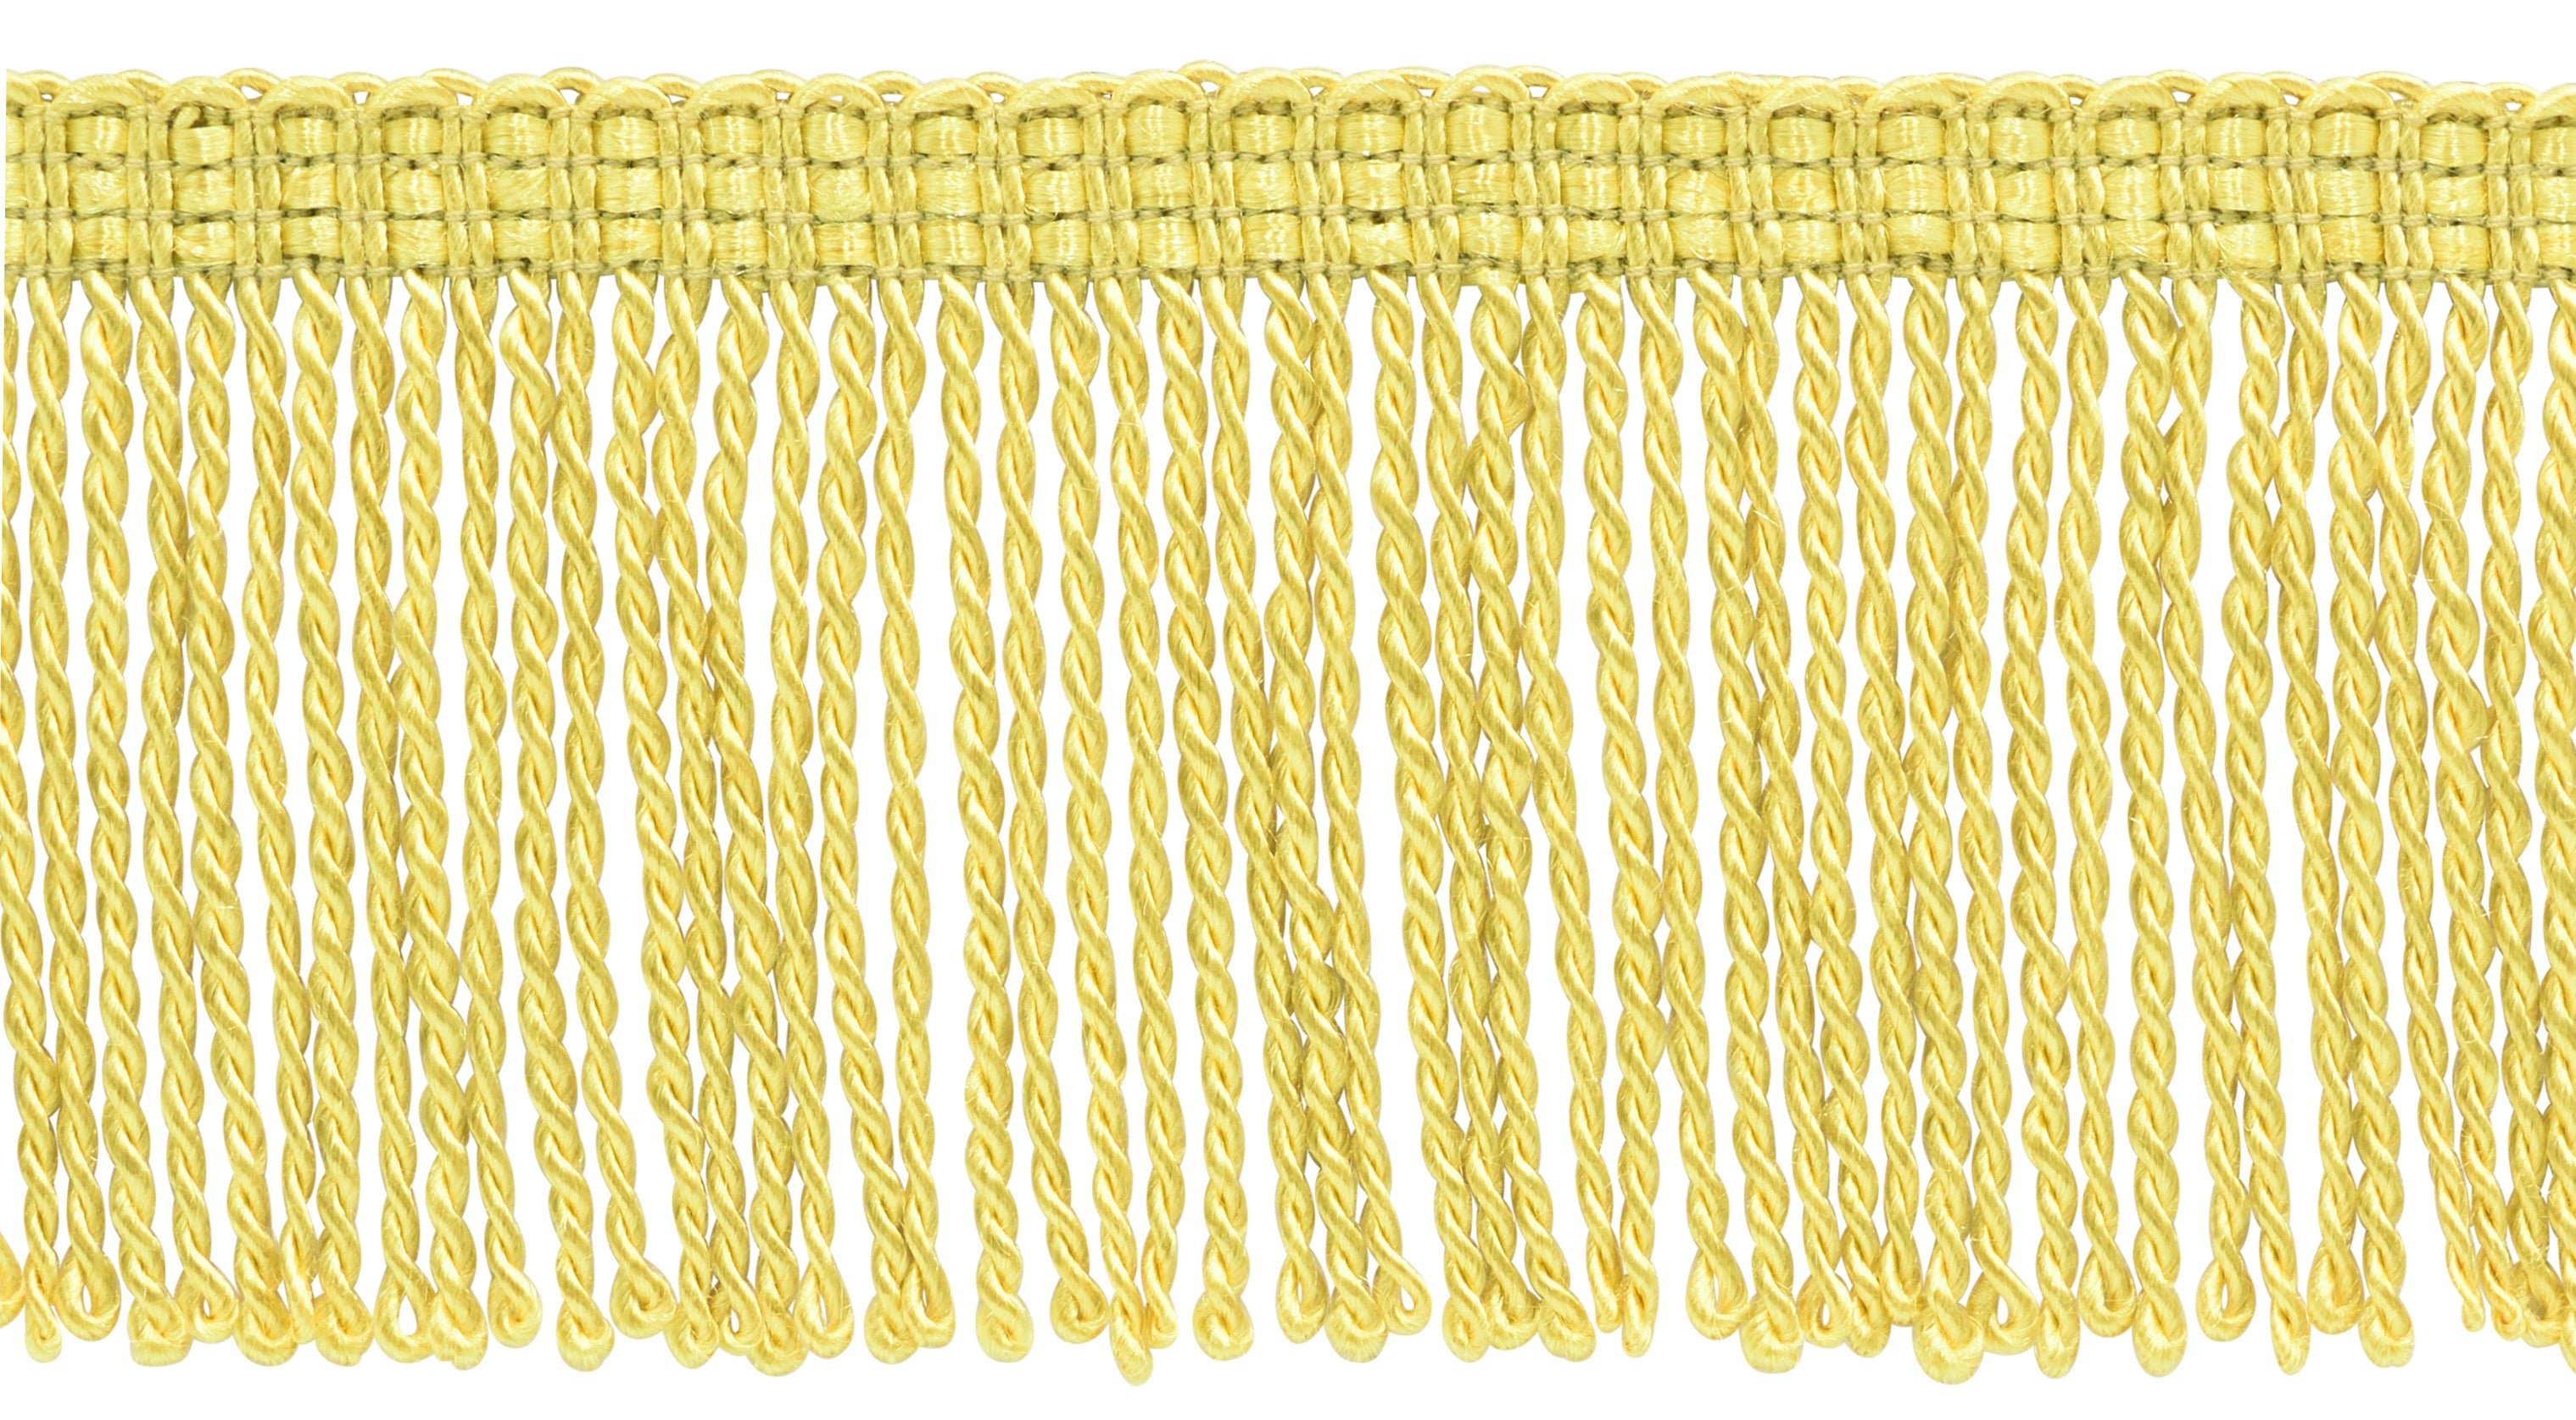 3 (7.5cm) Basic Trim Collection Thin Bullion Fringe Trim with Decorative  Knitted Gimp Header (Style# BFT3), Sold By The Yard (36/3 ft/0.9m)